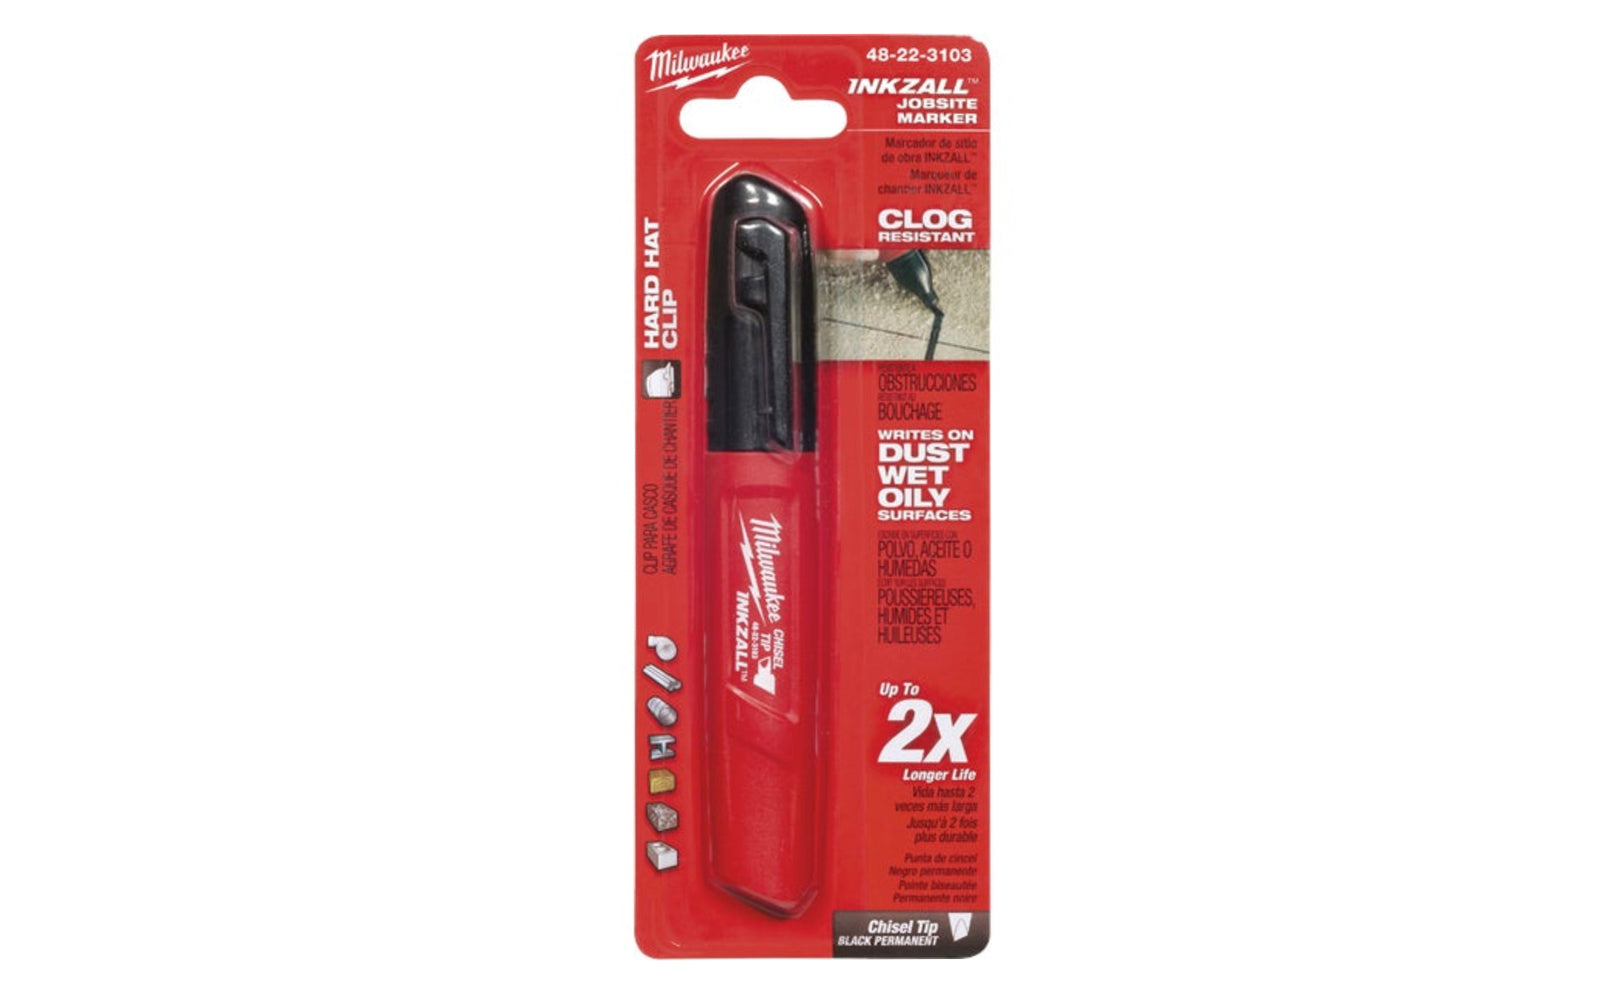 Milwaukee Inkzall Chisel Tip  Jobsite Marker - Black. Jobsite permanent markers feature clog resistant tips and the ability to write through dusty, wet or oily surfaces. Durable marker pens are designed for writing on rough surfaces. 48-22-3103. 